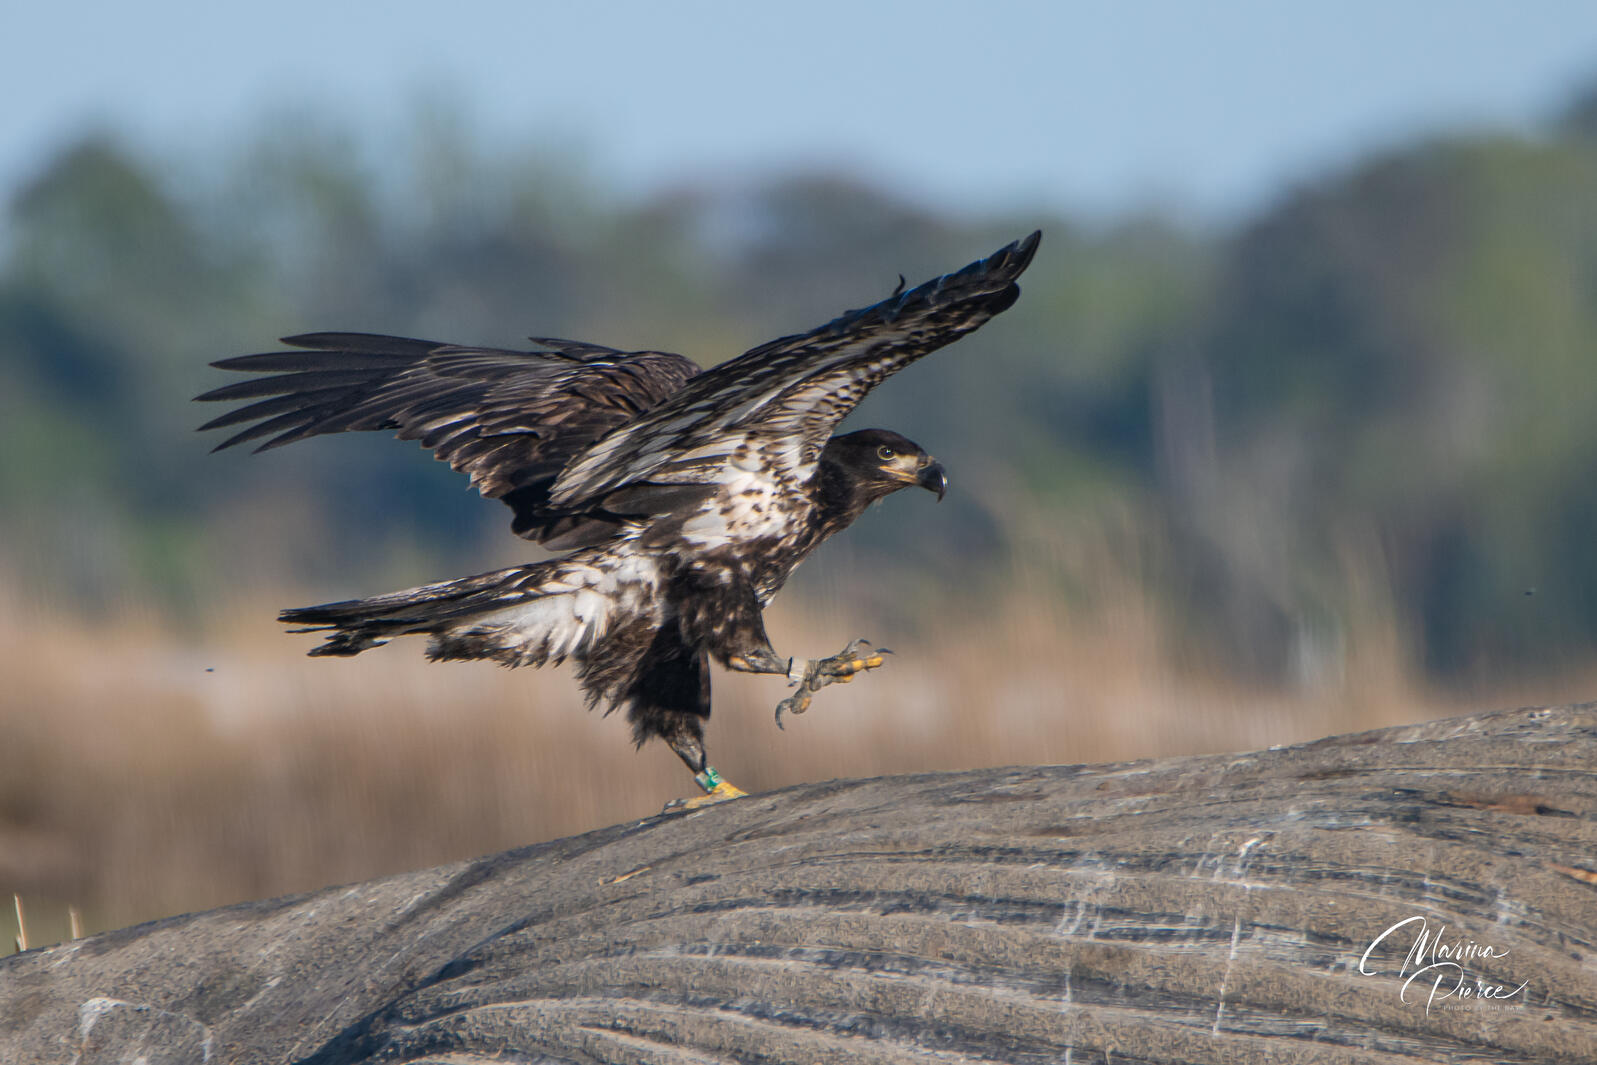 A young Bald Eagle sits atop a whale carcass in Virginia, but zoomed in so the whale is only visible as ripples the bird is standing on.